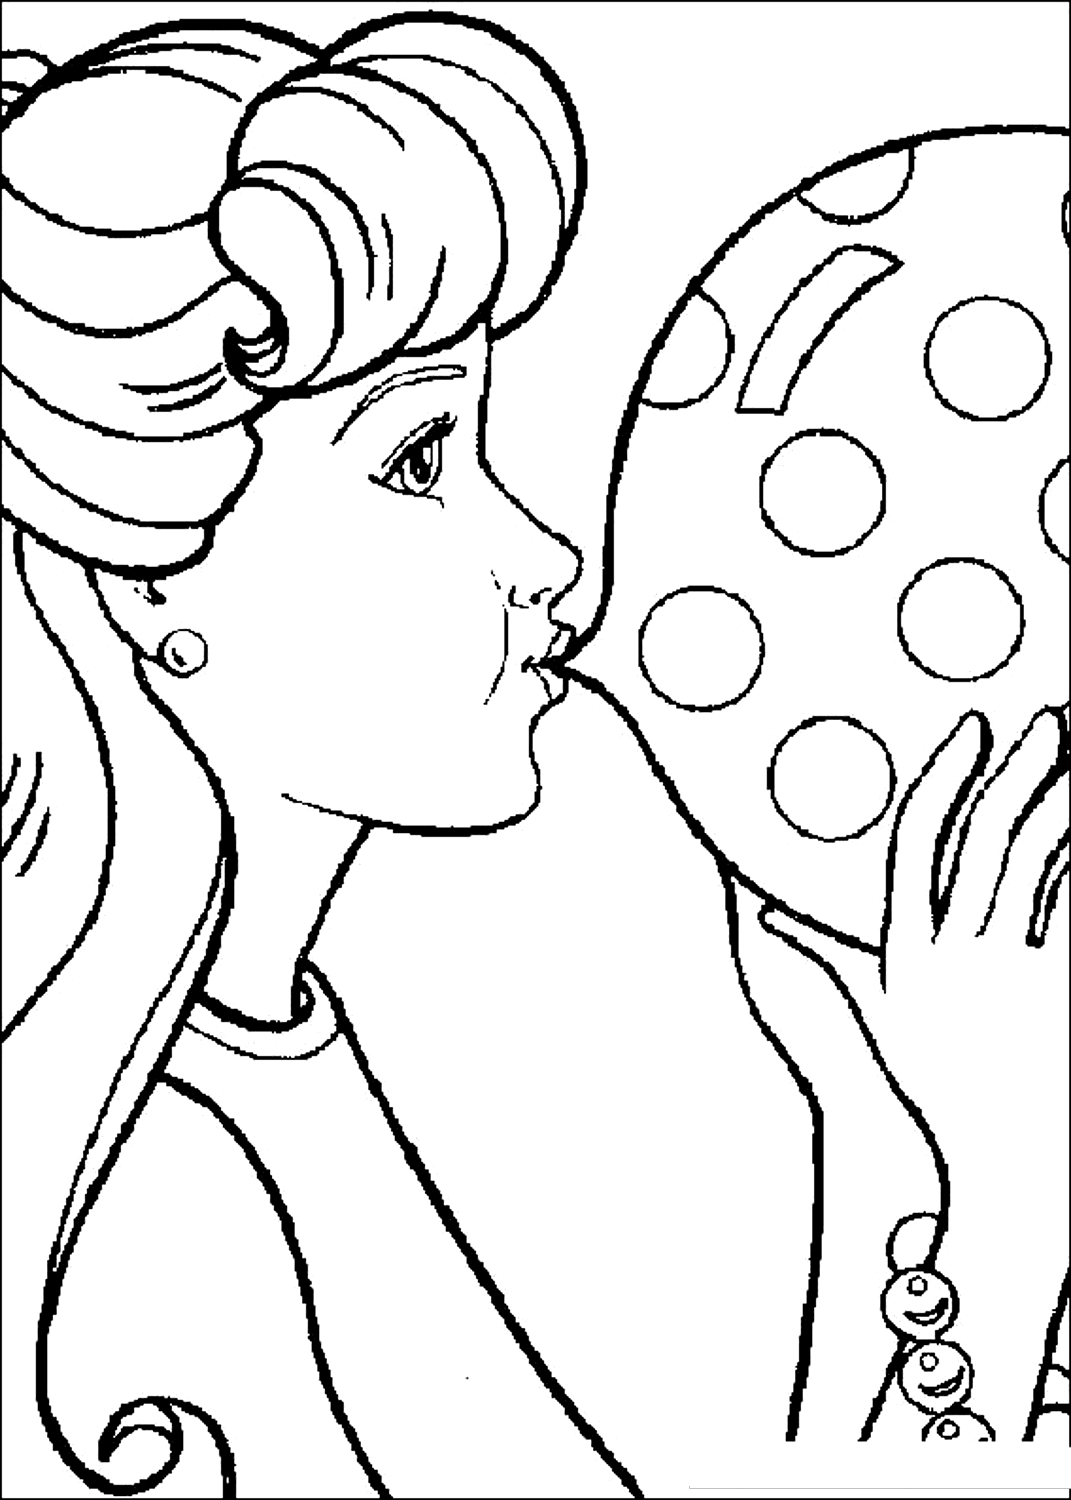 Barbie 06  coloring pages to print and coloring